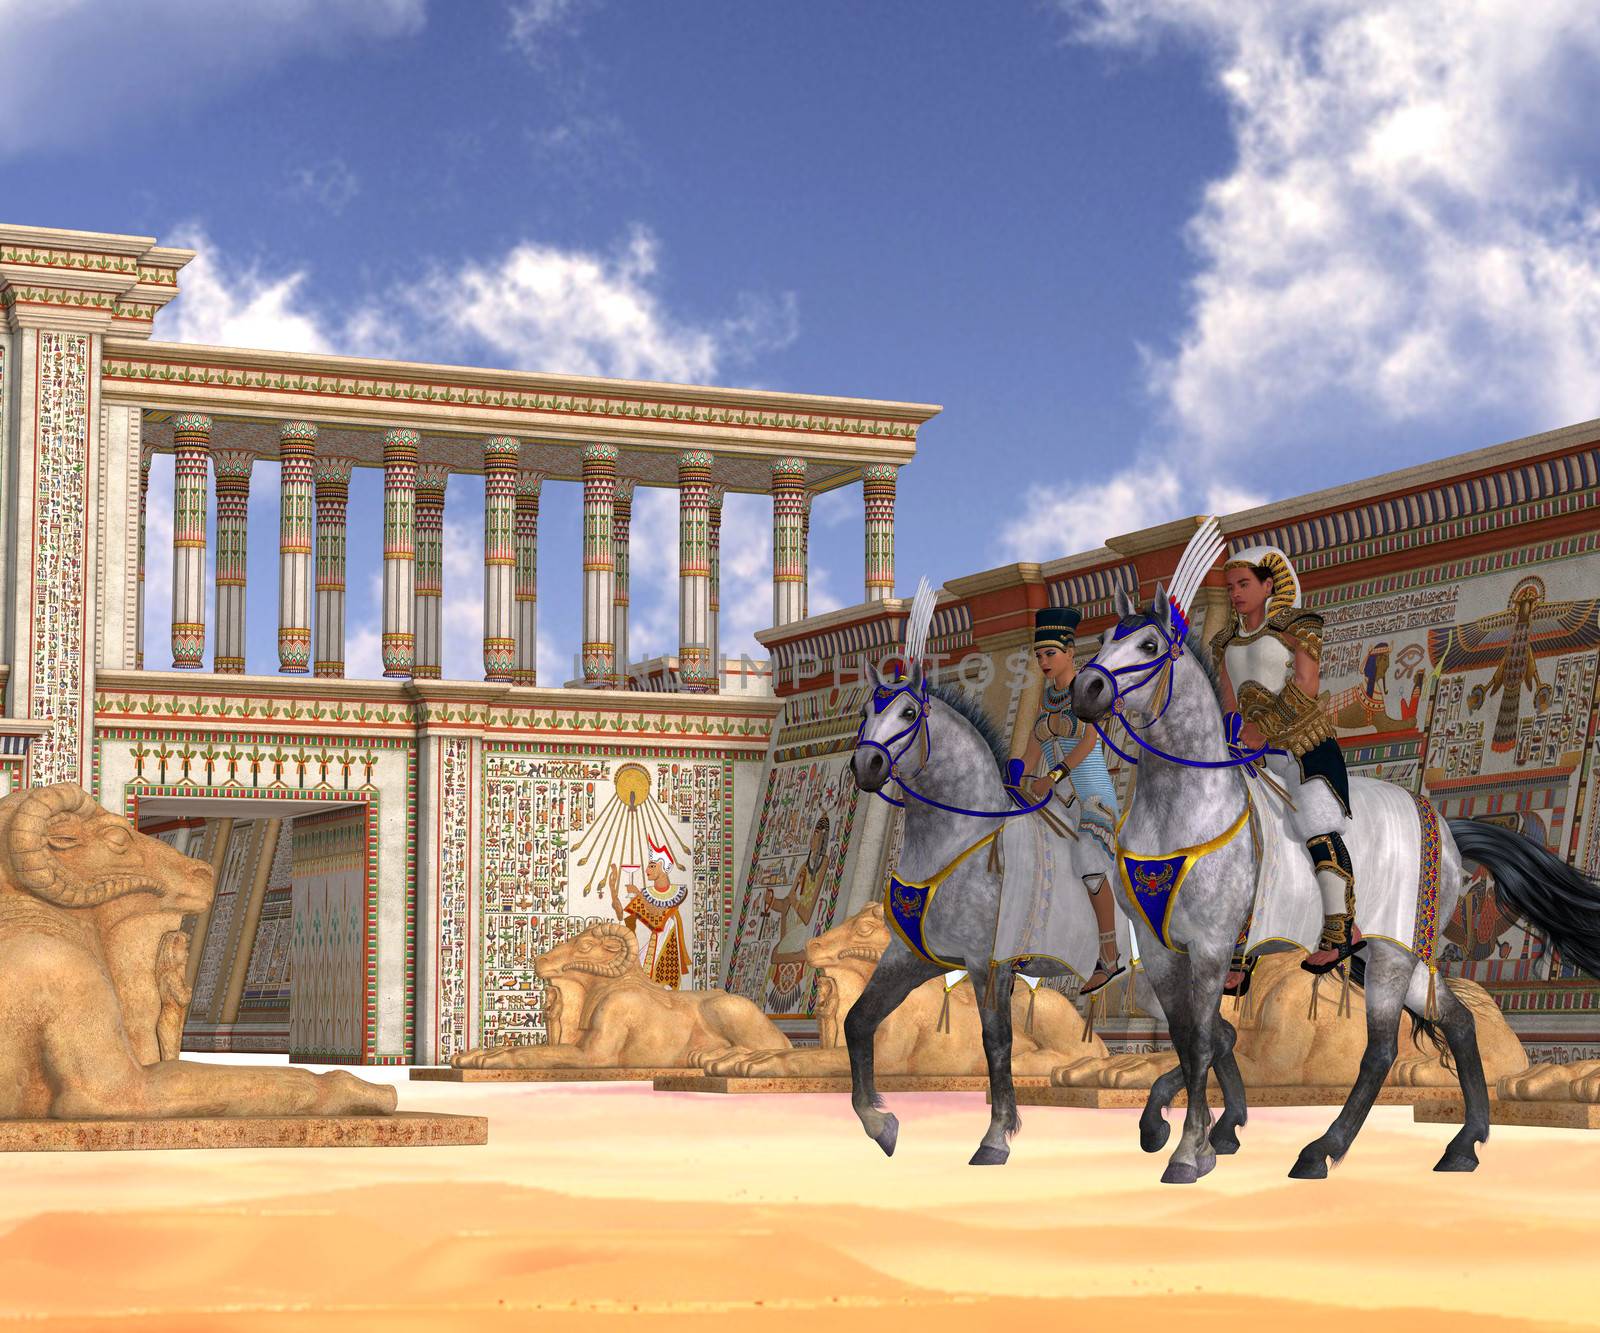 The Pharaoh and queen of Egypt take a ride on horseback through their kingdom.